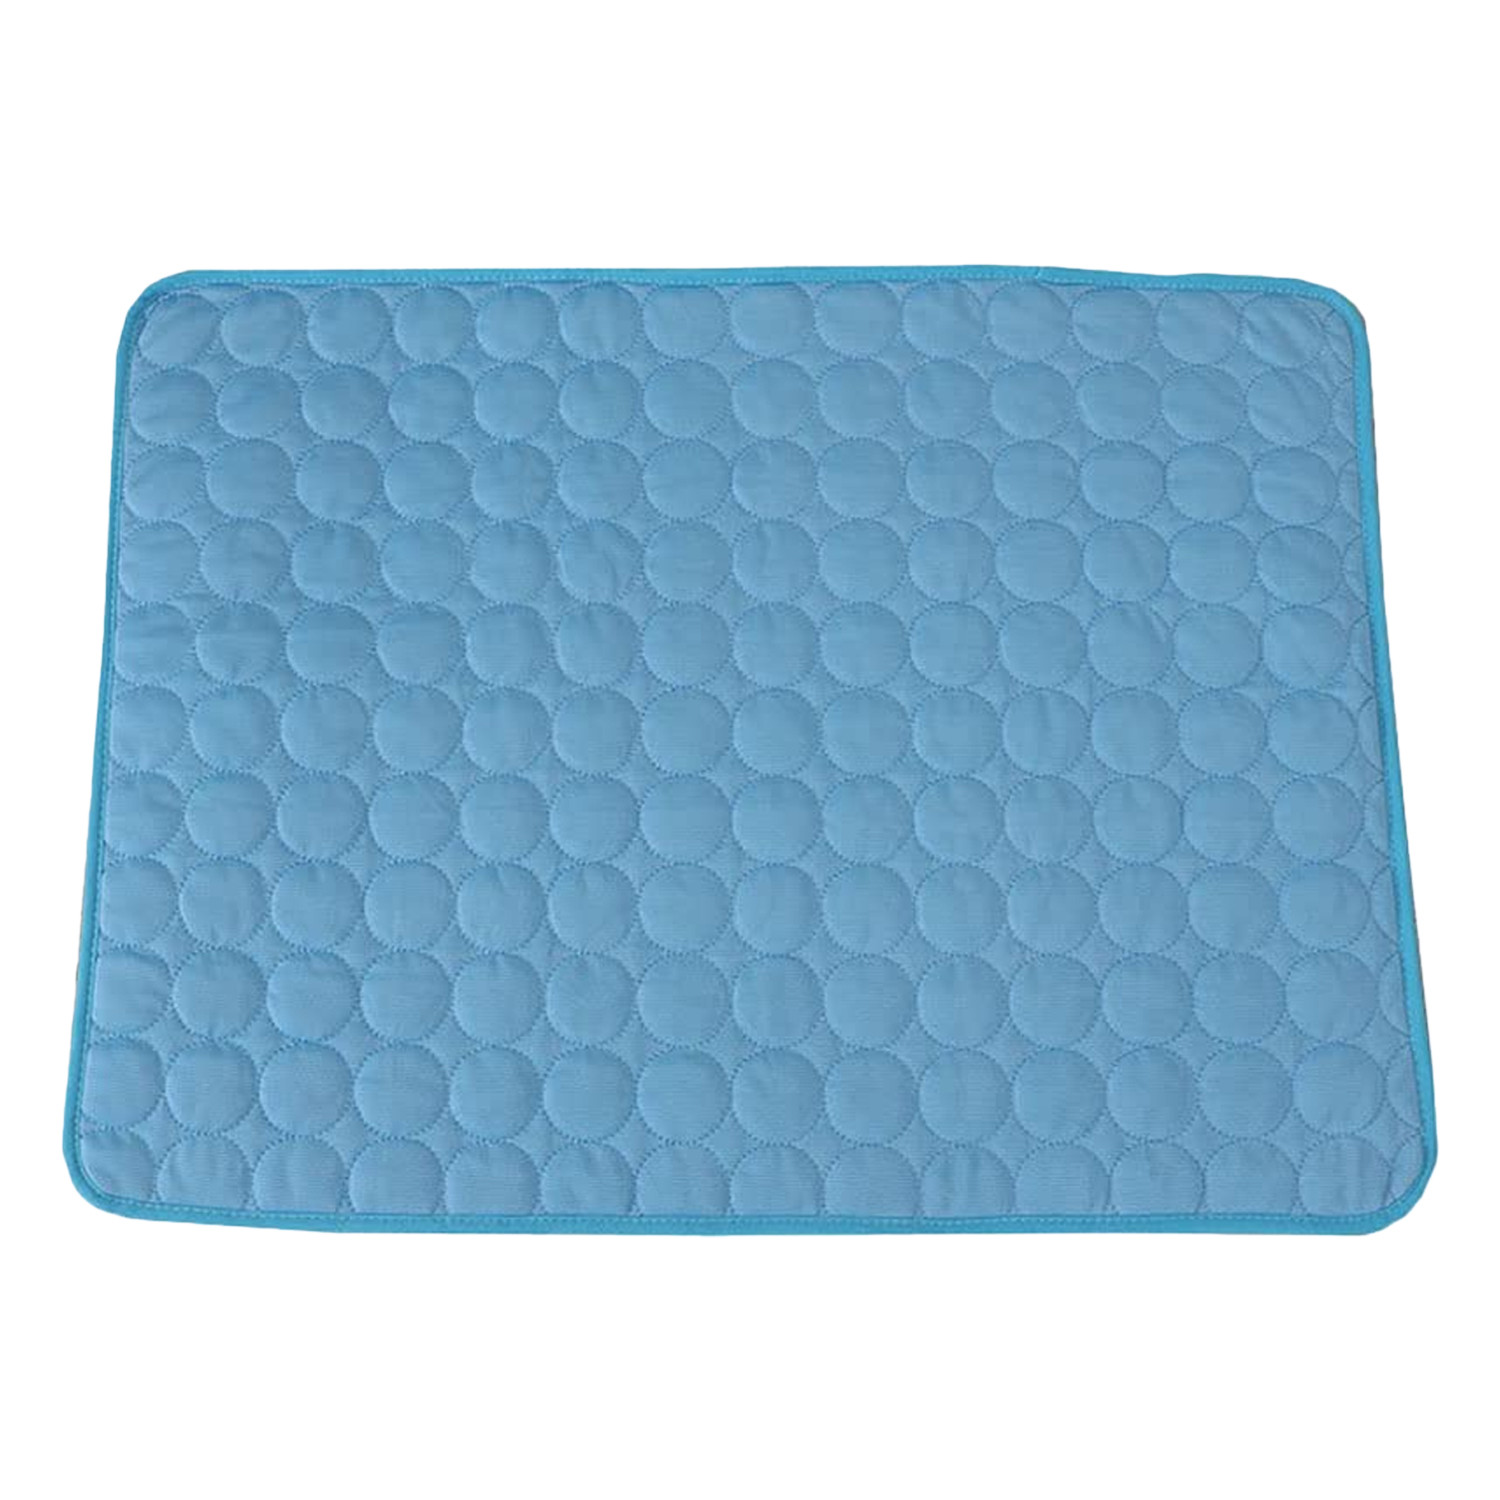 Kuber Industries Rectangular Dog & Cat Bed|Premium Cool Ice Silk with Polyester with Bottom Mesh|Multi-Utility Self-Cooling Pad for Dog & Cat|Light-Weight & Durable Dog Bed|ZQCJ001B-XS|Blue